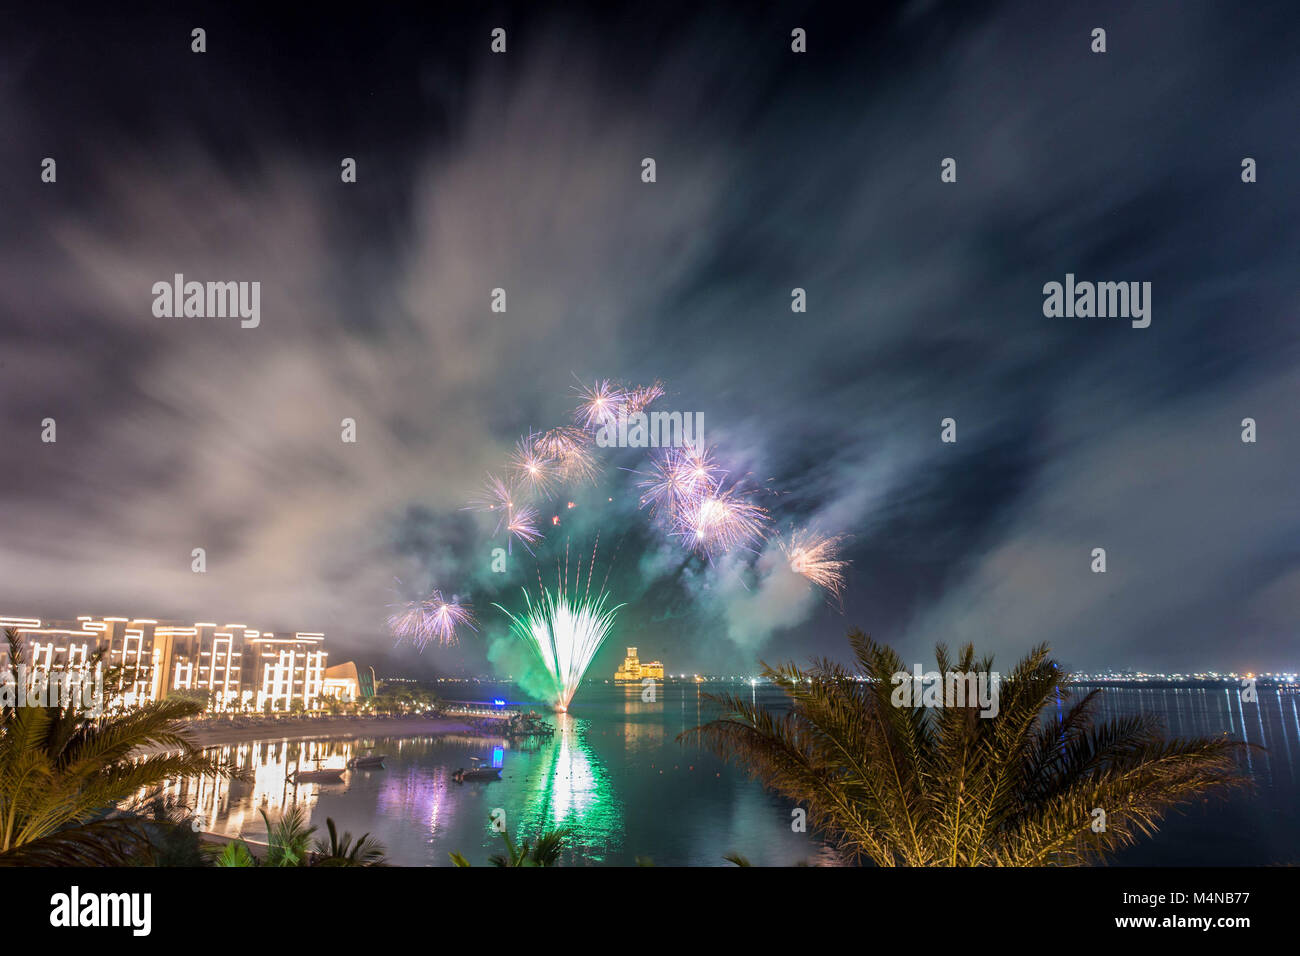 Ras Al Khaimah, United Arab Emirates. 16th Feb, 2018. The UAE Ministry of State for Happiness launched its first Happiness Festival of 2018 in Ras Al Khaimah. The UAE is the only country in the world that has a Ministry for happiness and positivity. A key feature of the Festival is that it ends with a fireworks display. The Waldorf Astoria Ras Al Khaimah is seen in the distance during the fireworks display. Credit: Mike Hook/SOPA/ZUMA Wire/Alamy Live News Stock Photo